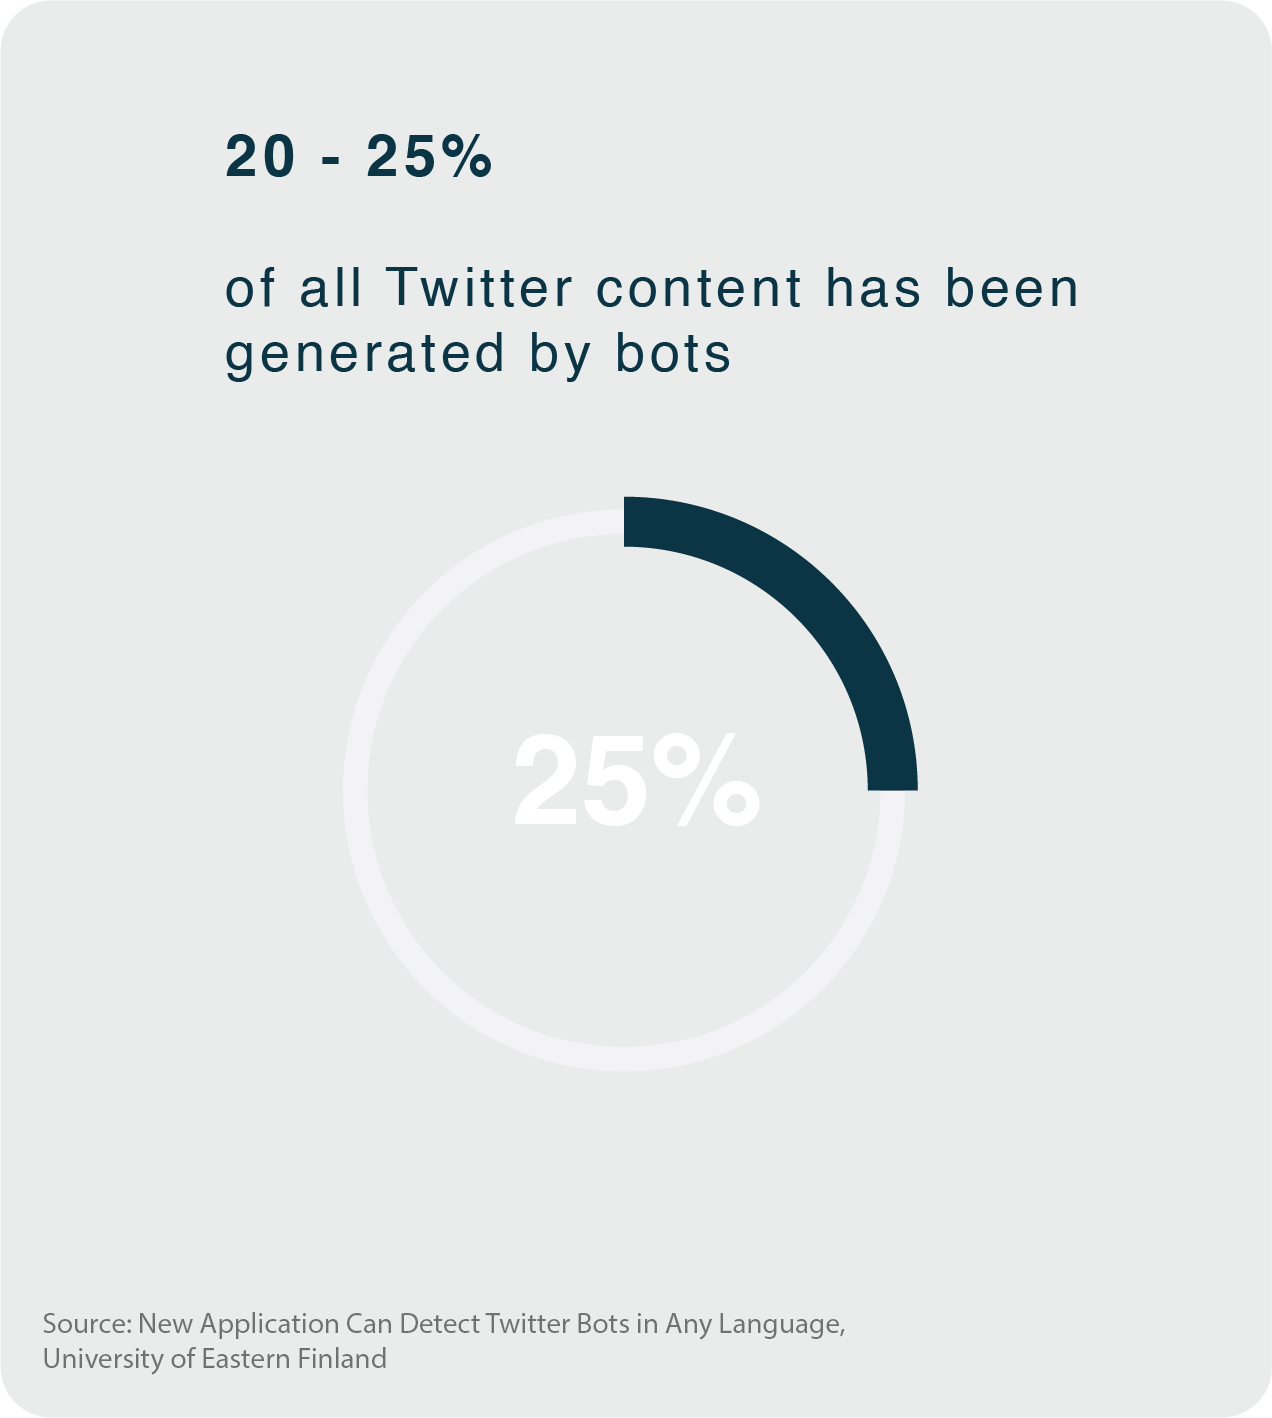 Pie chart showing 20-25% of Twitter content has been generated by bots